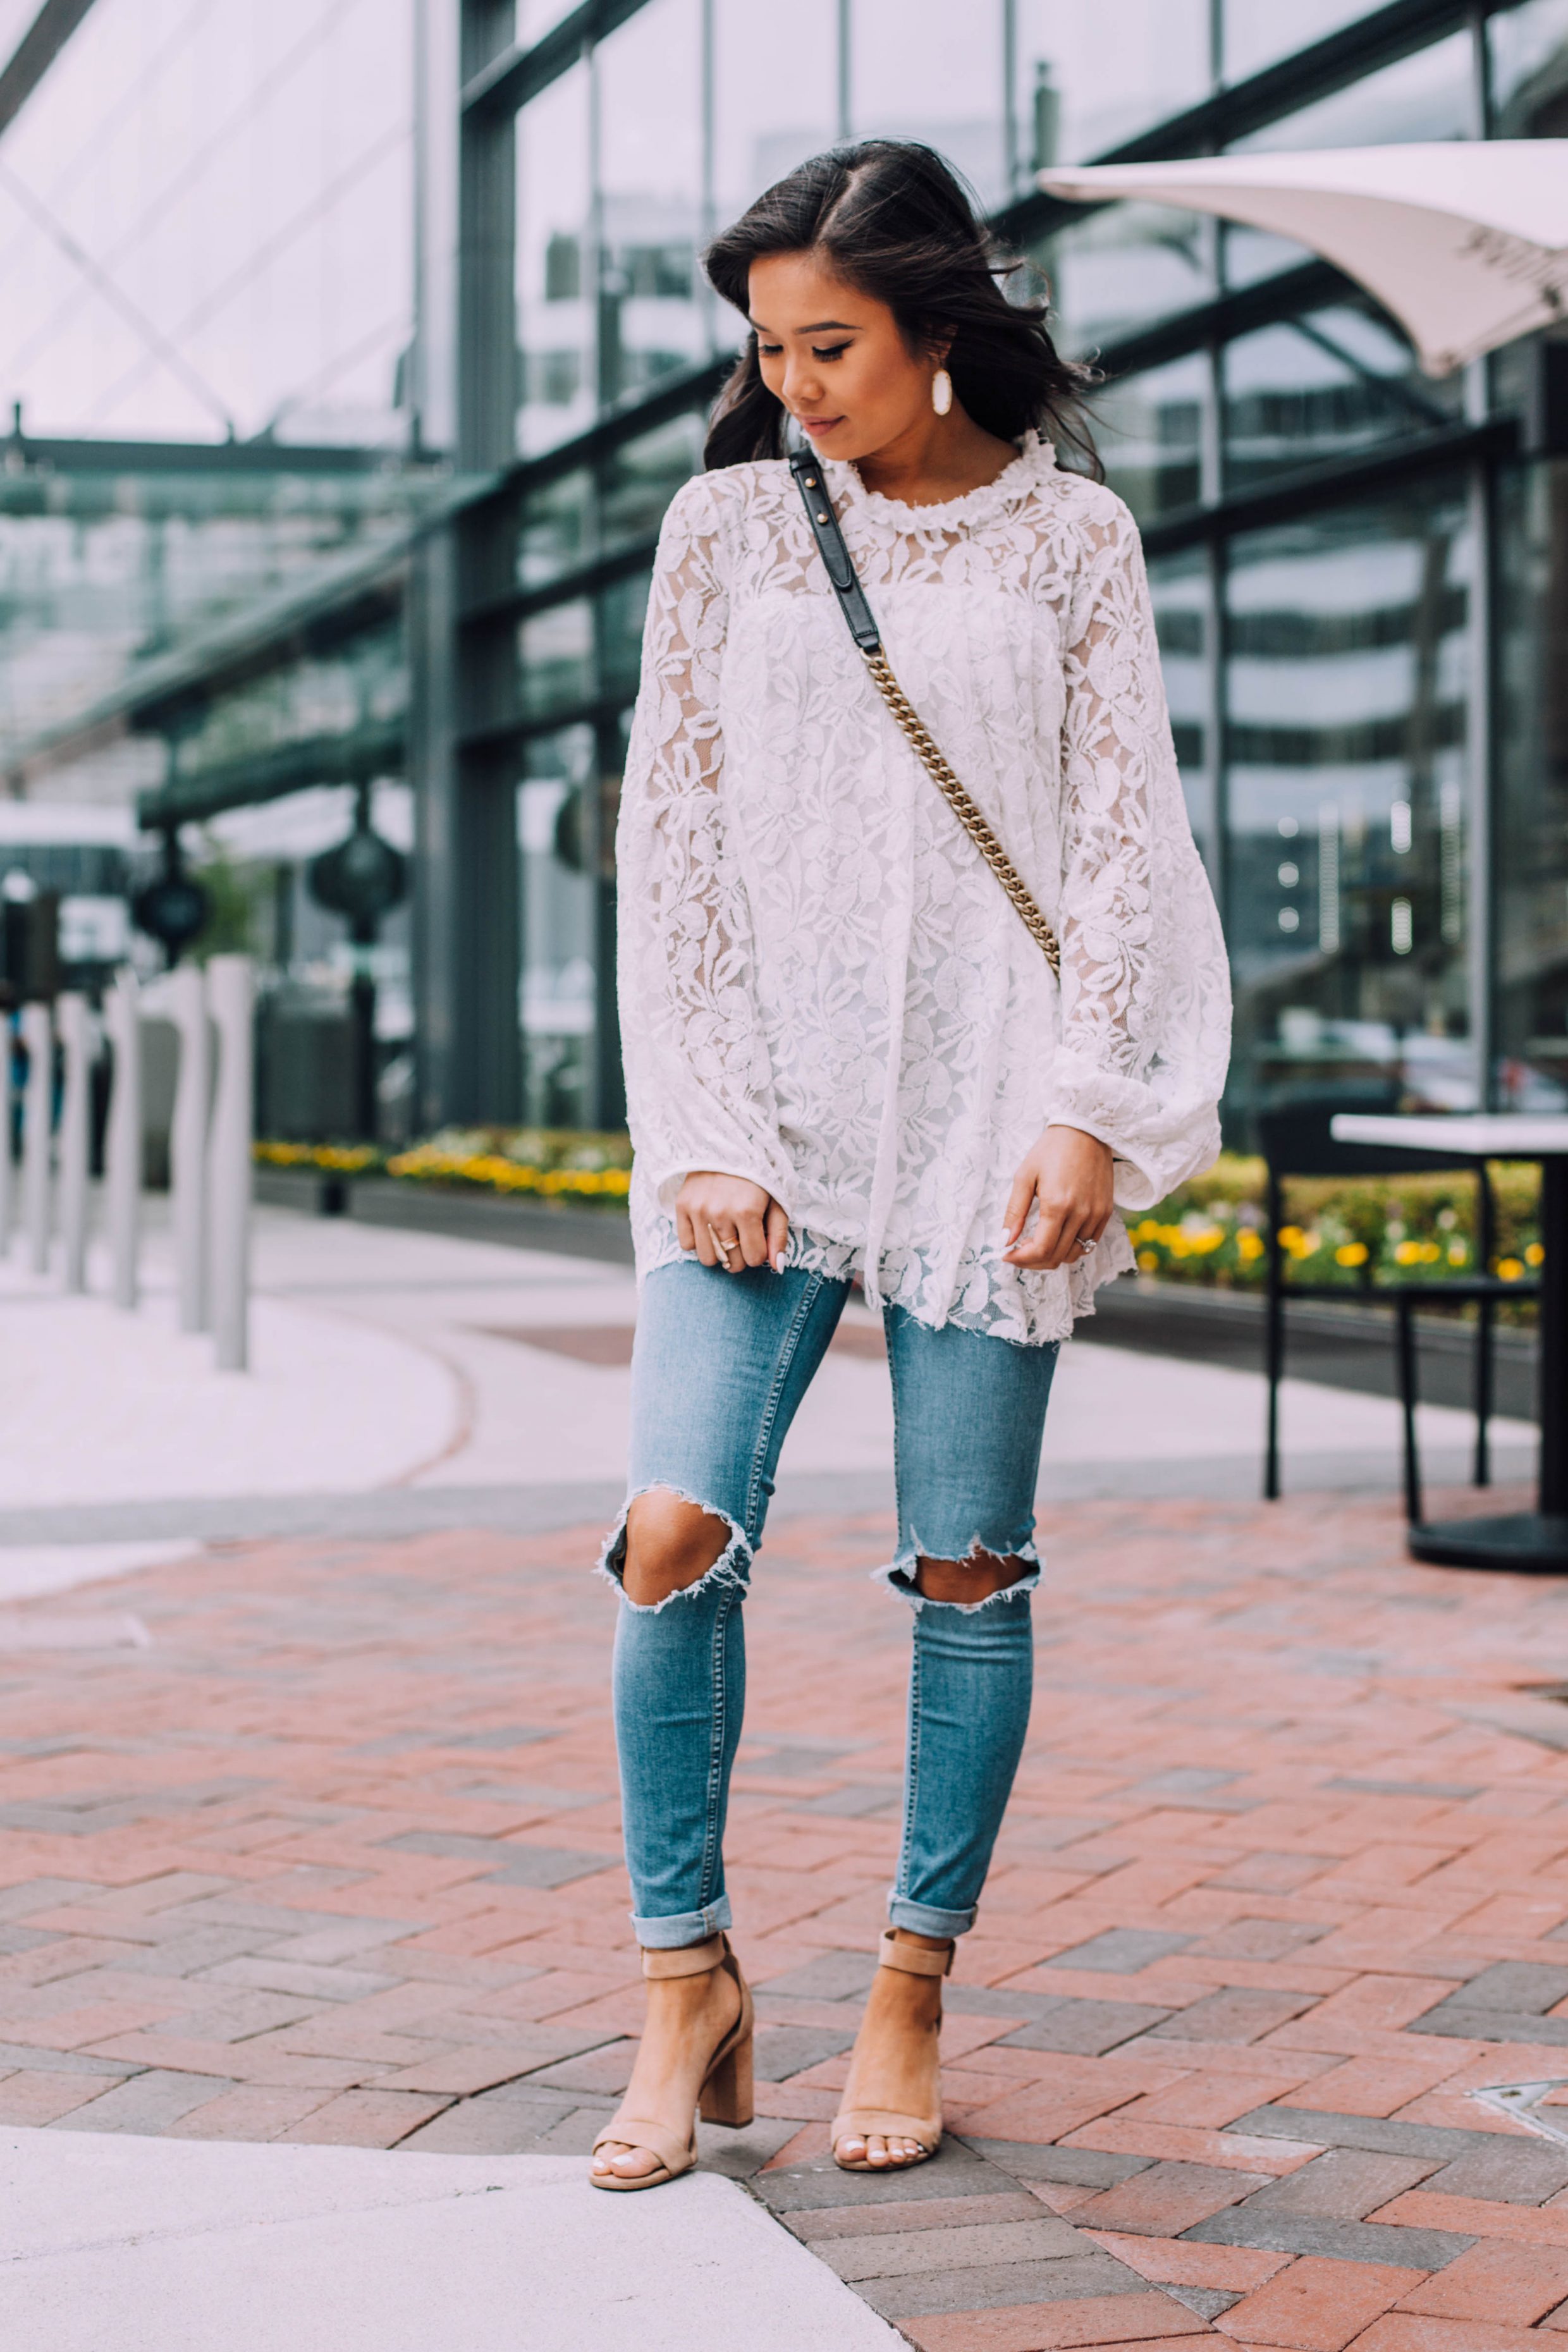 Spring Whites :: The Perfect Lace Tunic - Color & Chic